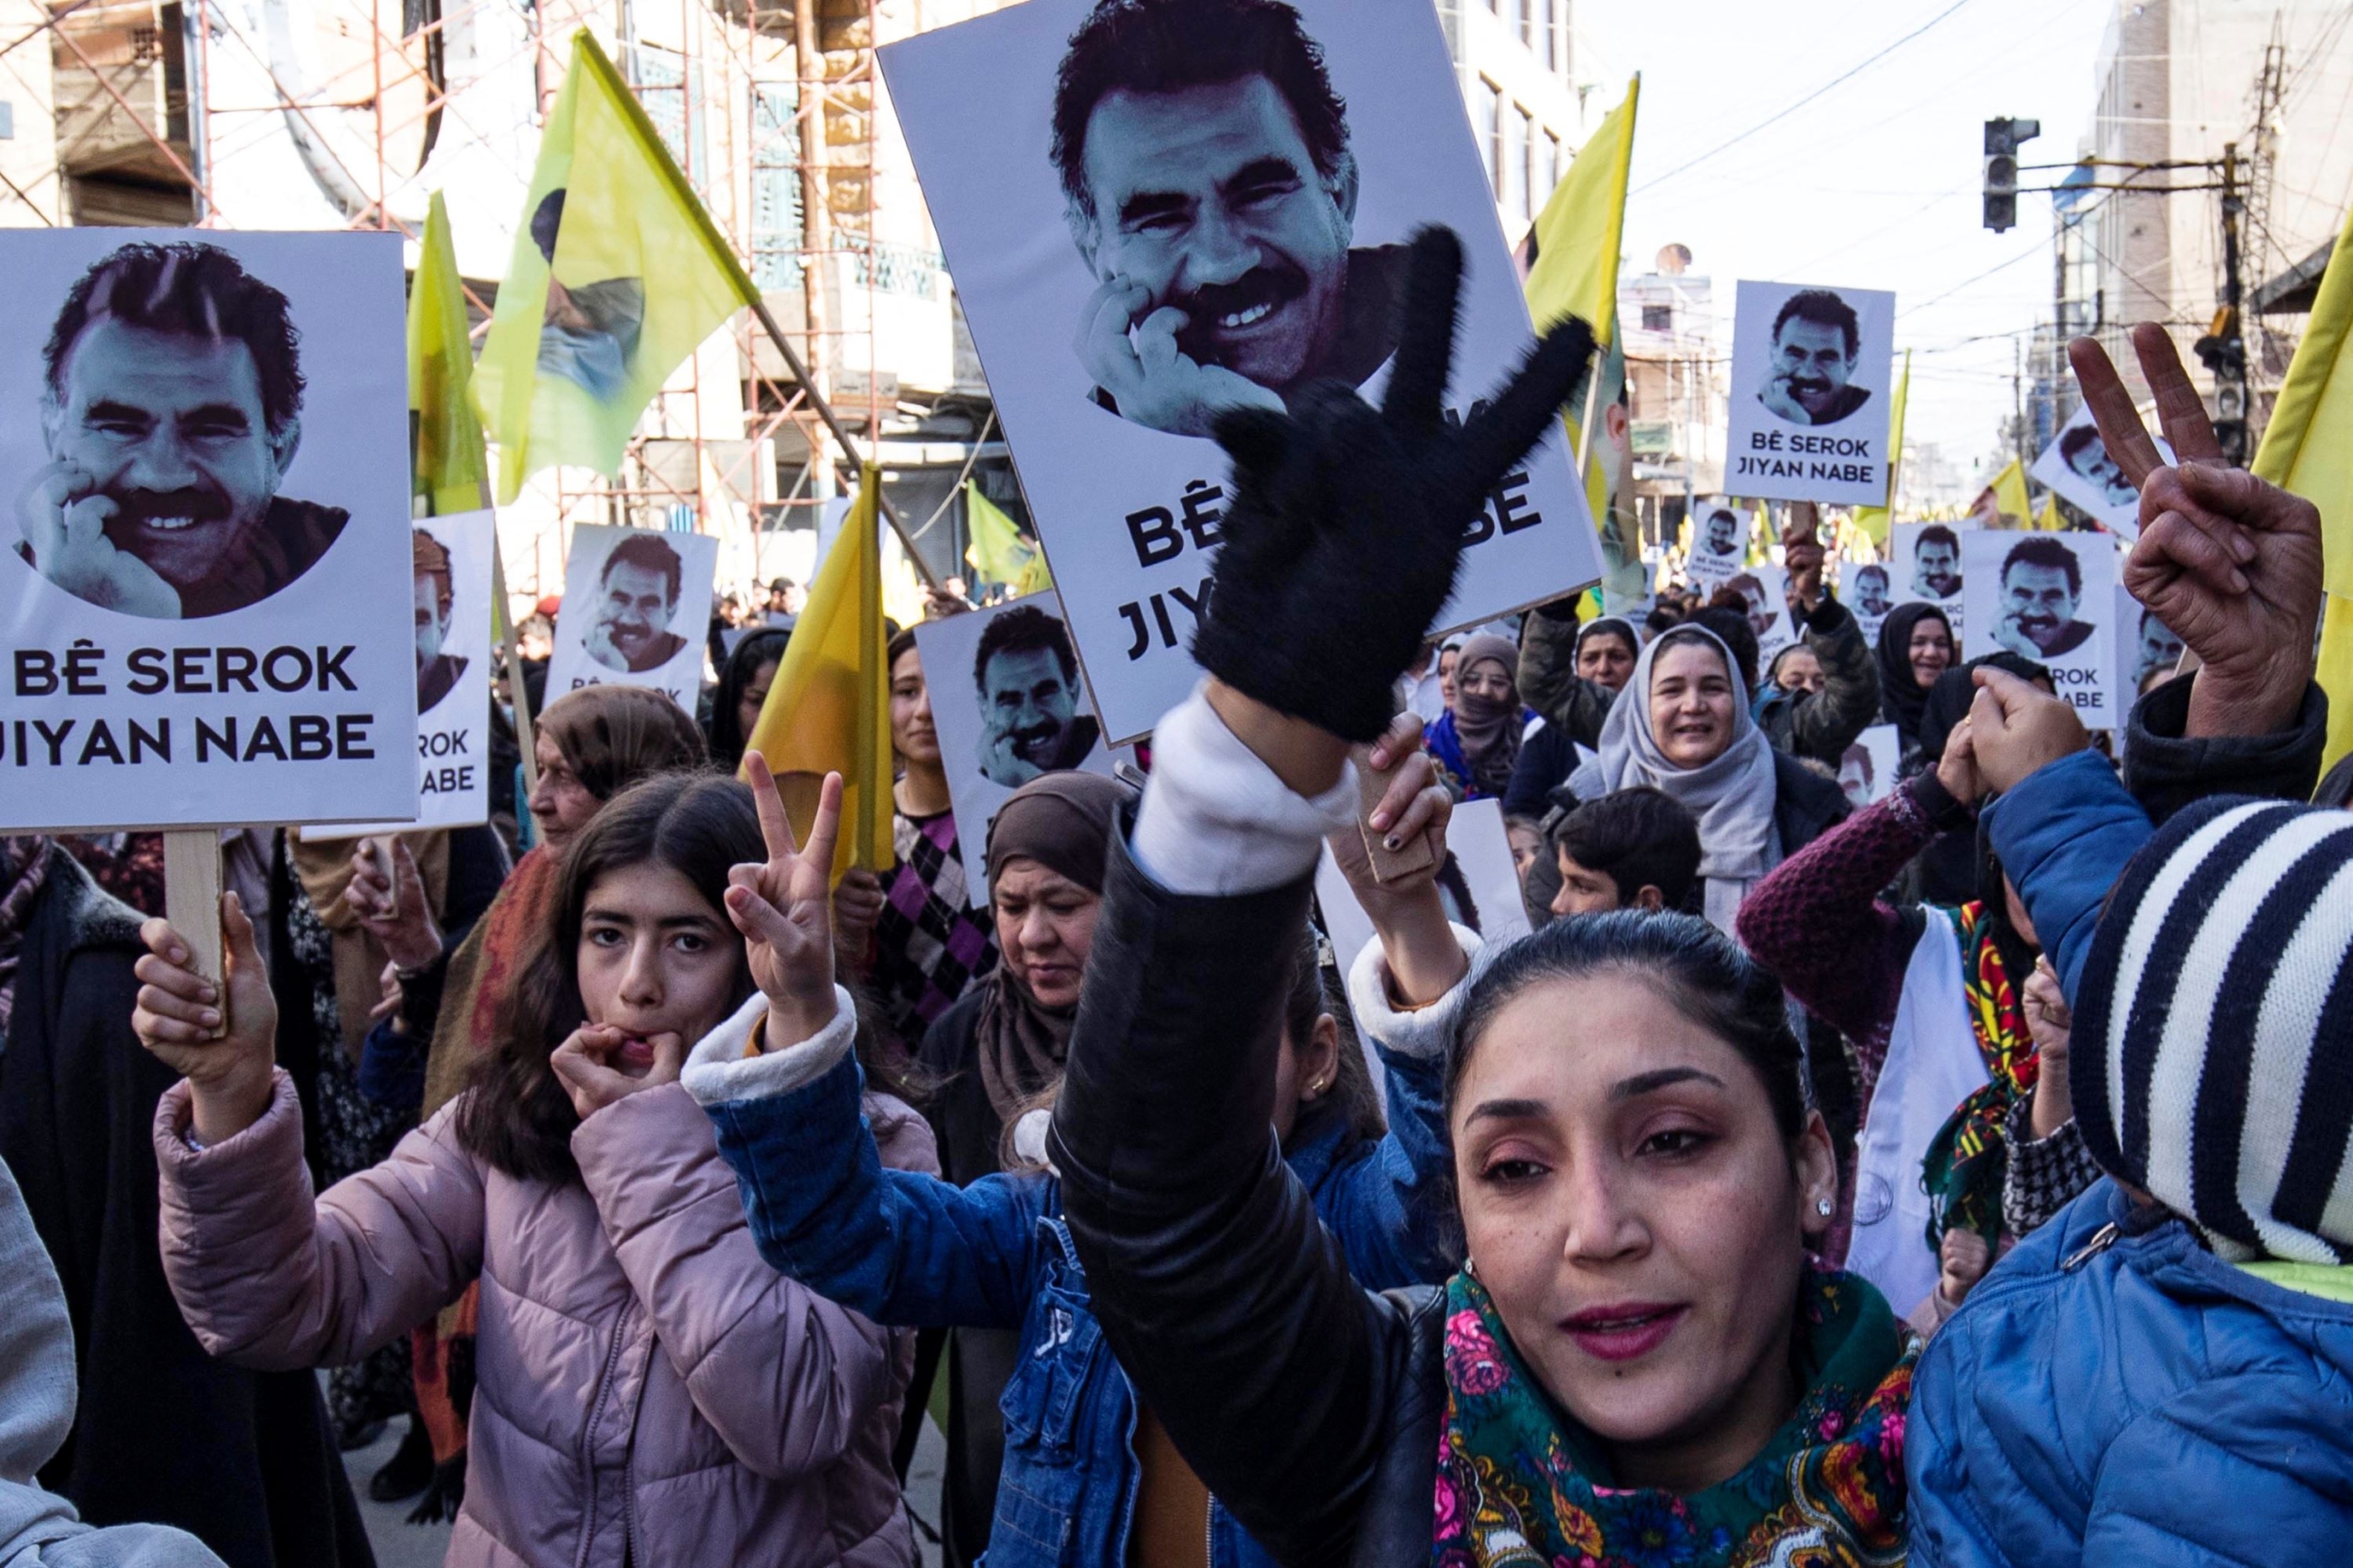 Protesters raise yellow flags and portraits showing the face of Abdullah Ocalan, the leader of the Kurdistan Worker's Party (PKK) -- jailed in Turkey since 1999 -- during a demonstration calling for his release, in the Kurdish-majority city of Qamishli in northeastern Syria on February 15, 2023 (AFP)